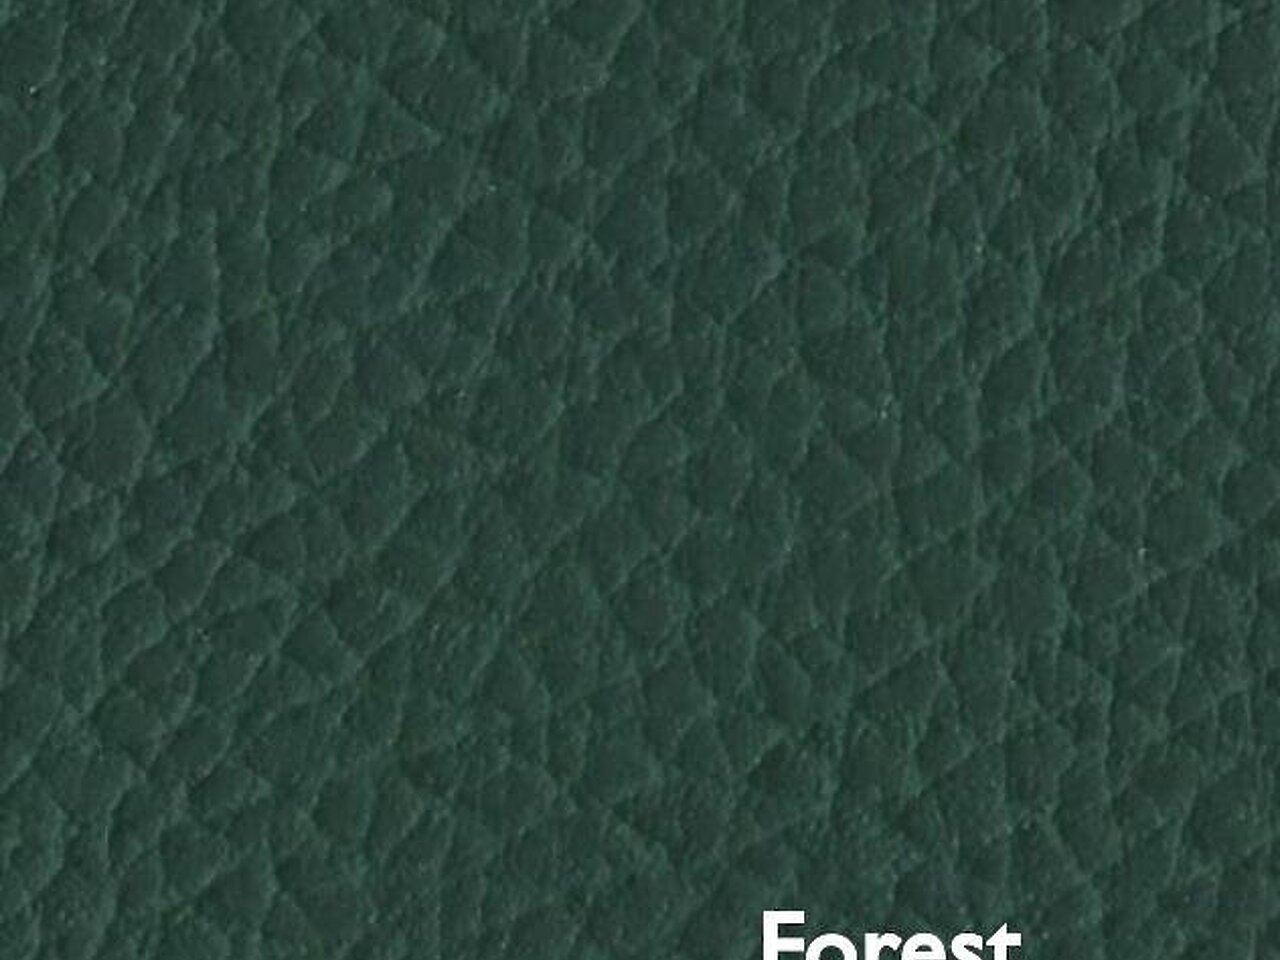 Teal Reptile Faux Leather, Outback Sea by Regal Fabrics, Vinyl Upholstery  Fabric, 54 Wide